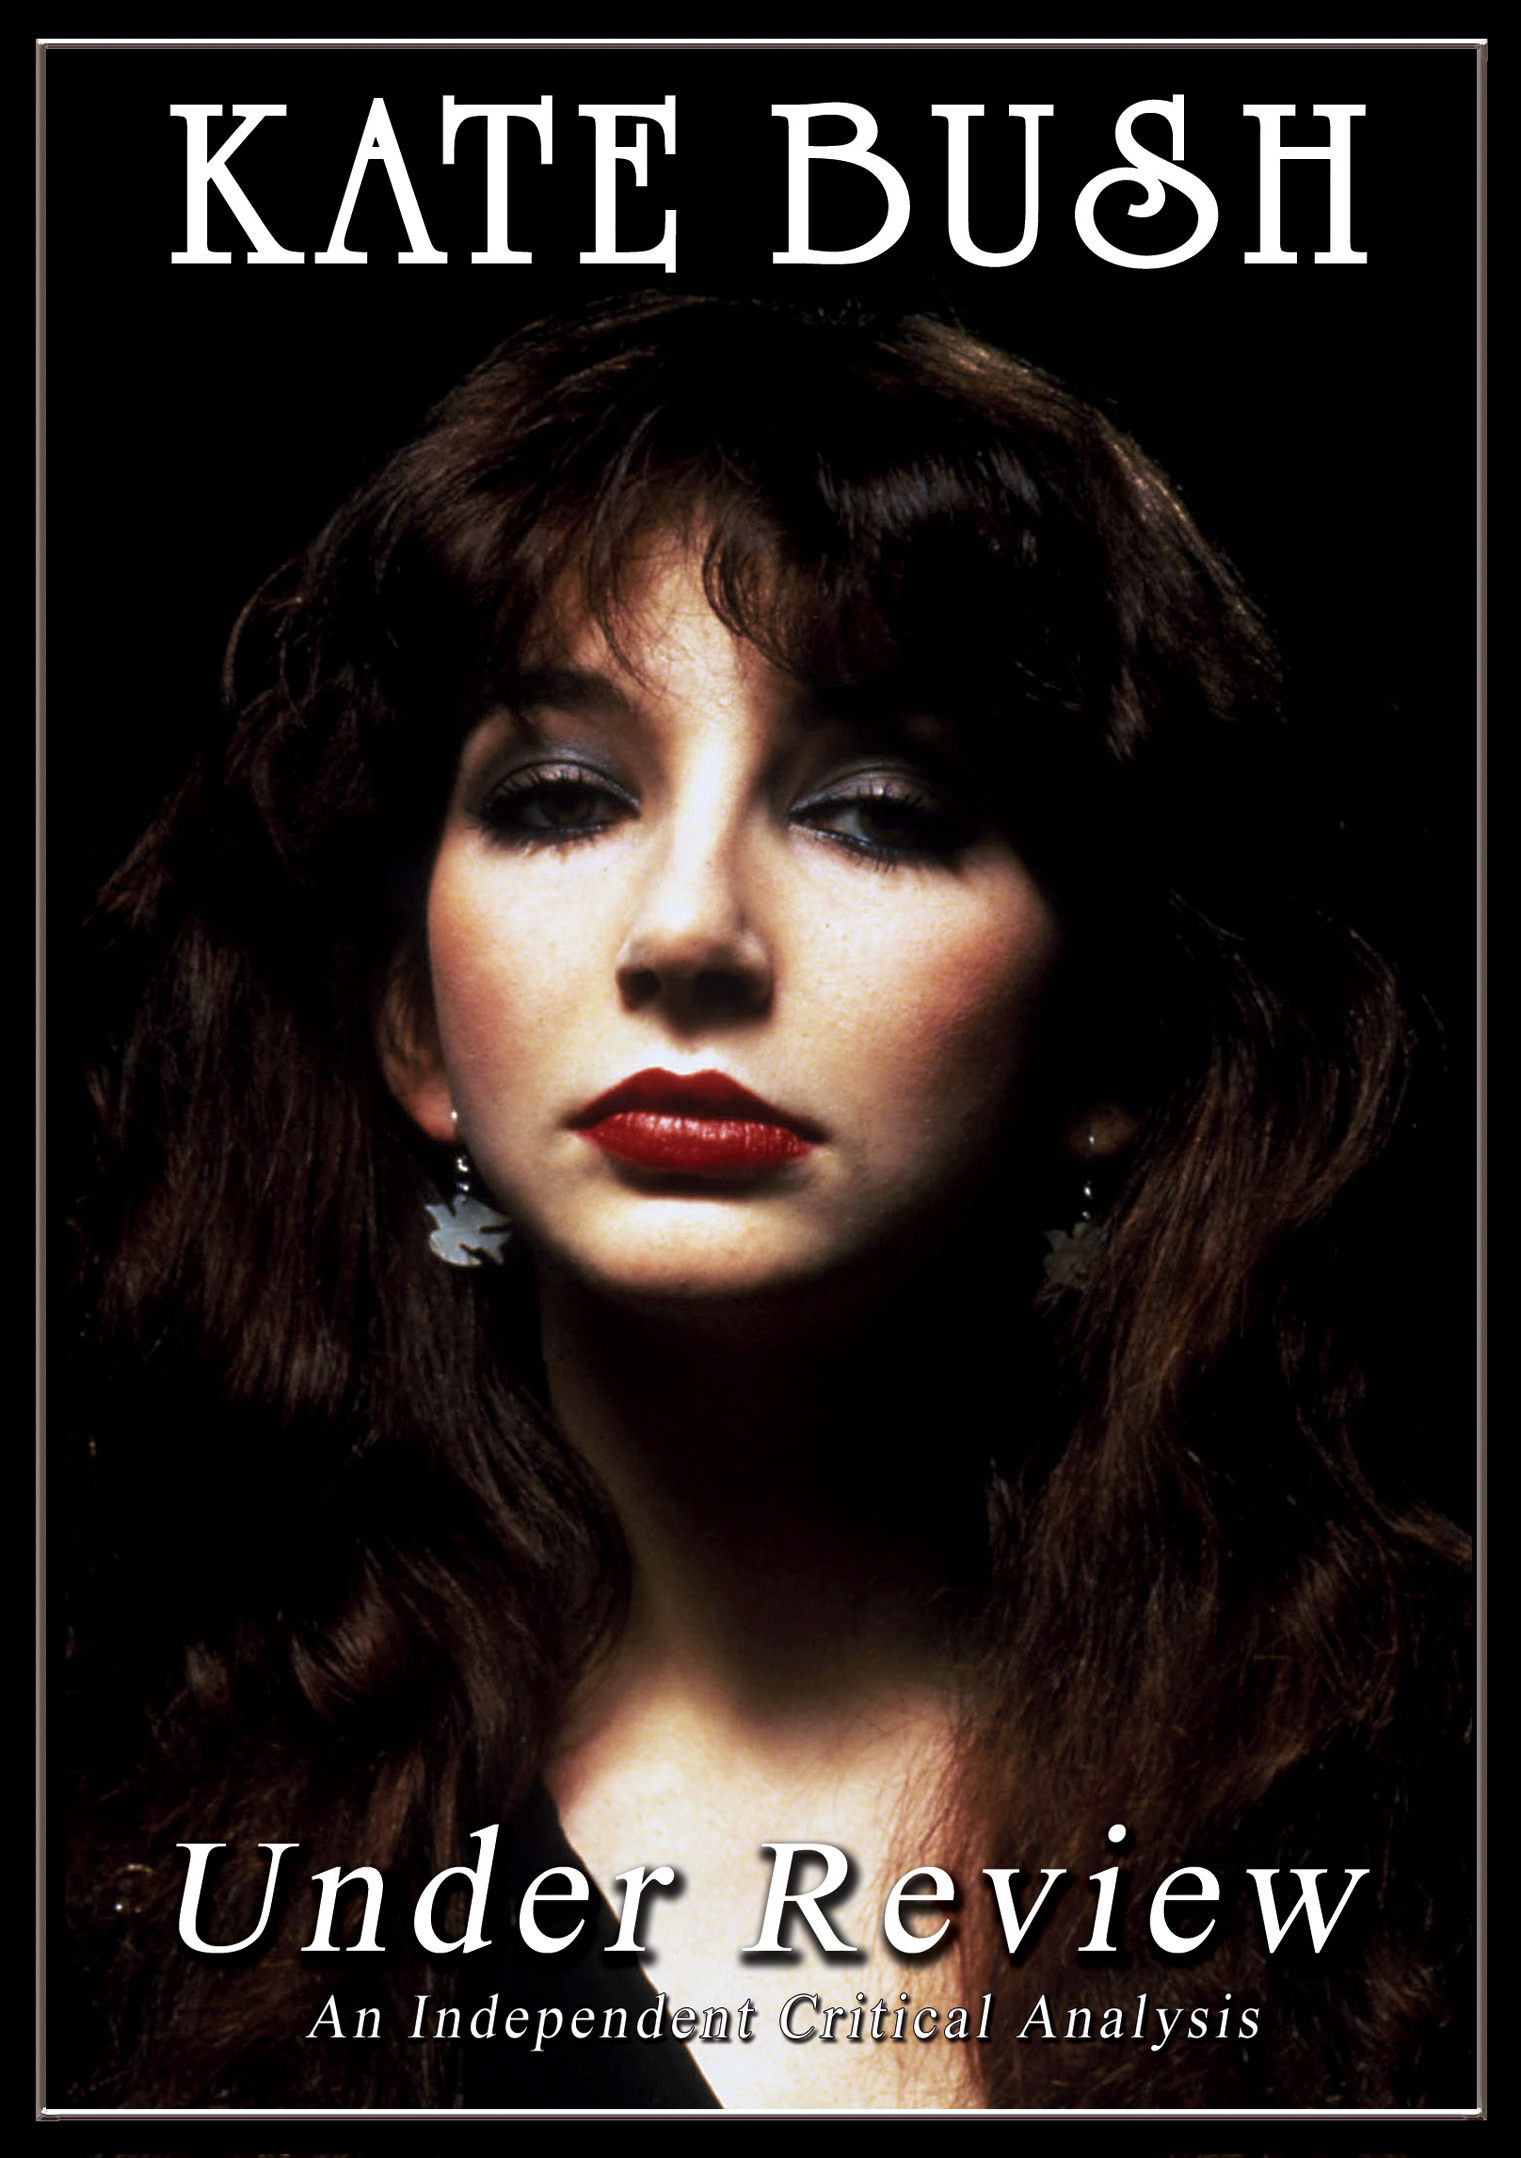 Kate Bush, Under Review, DVD, Cover